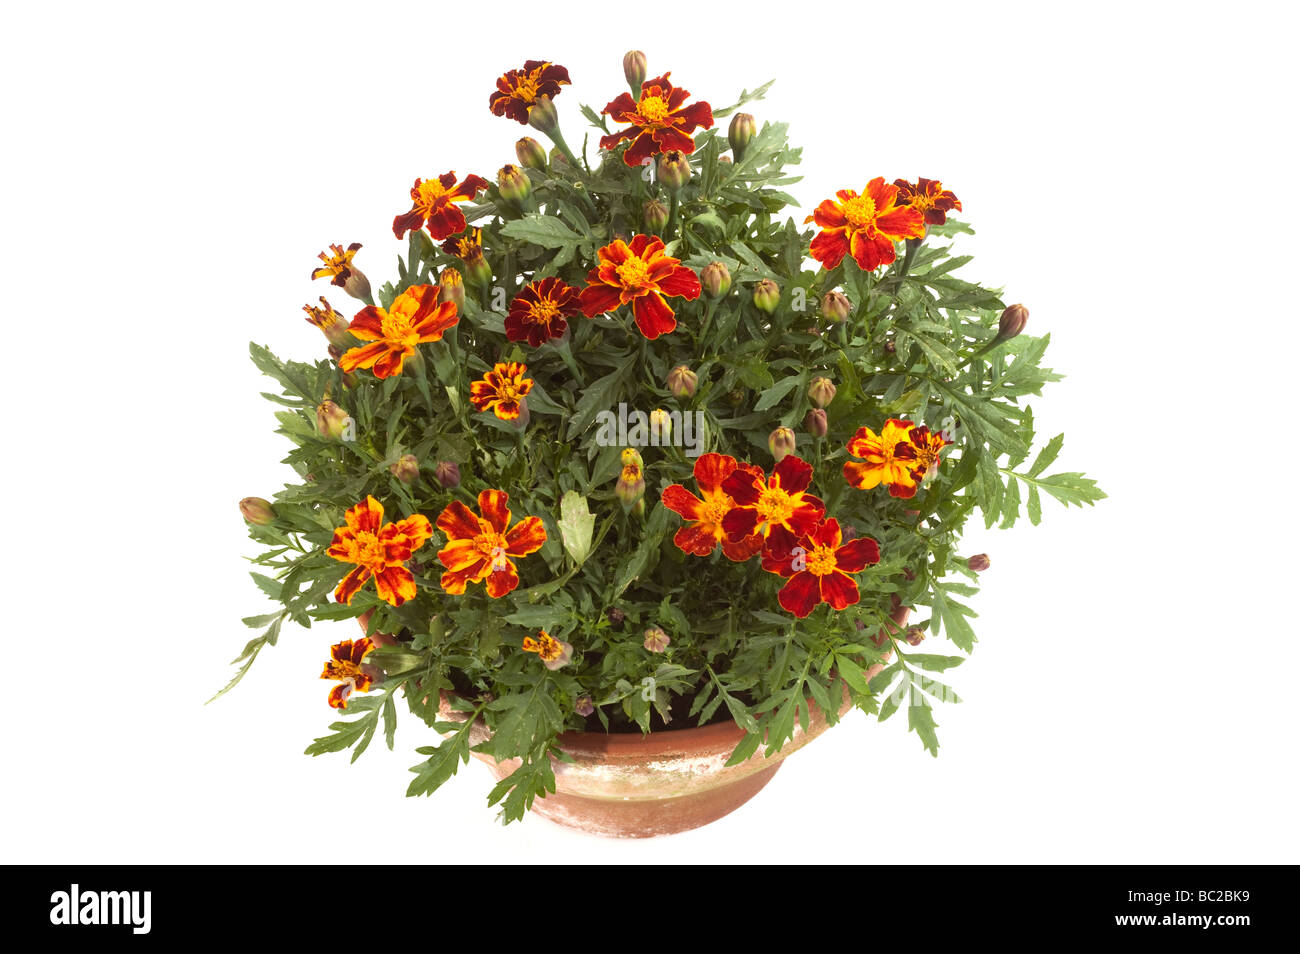 Bowl of red yellow, gold and orange dwarf  'French Marigolds' Tagetes Stock Photo